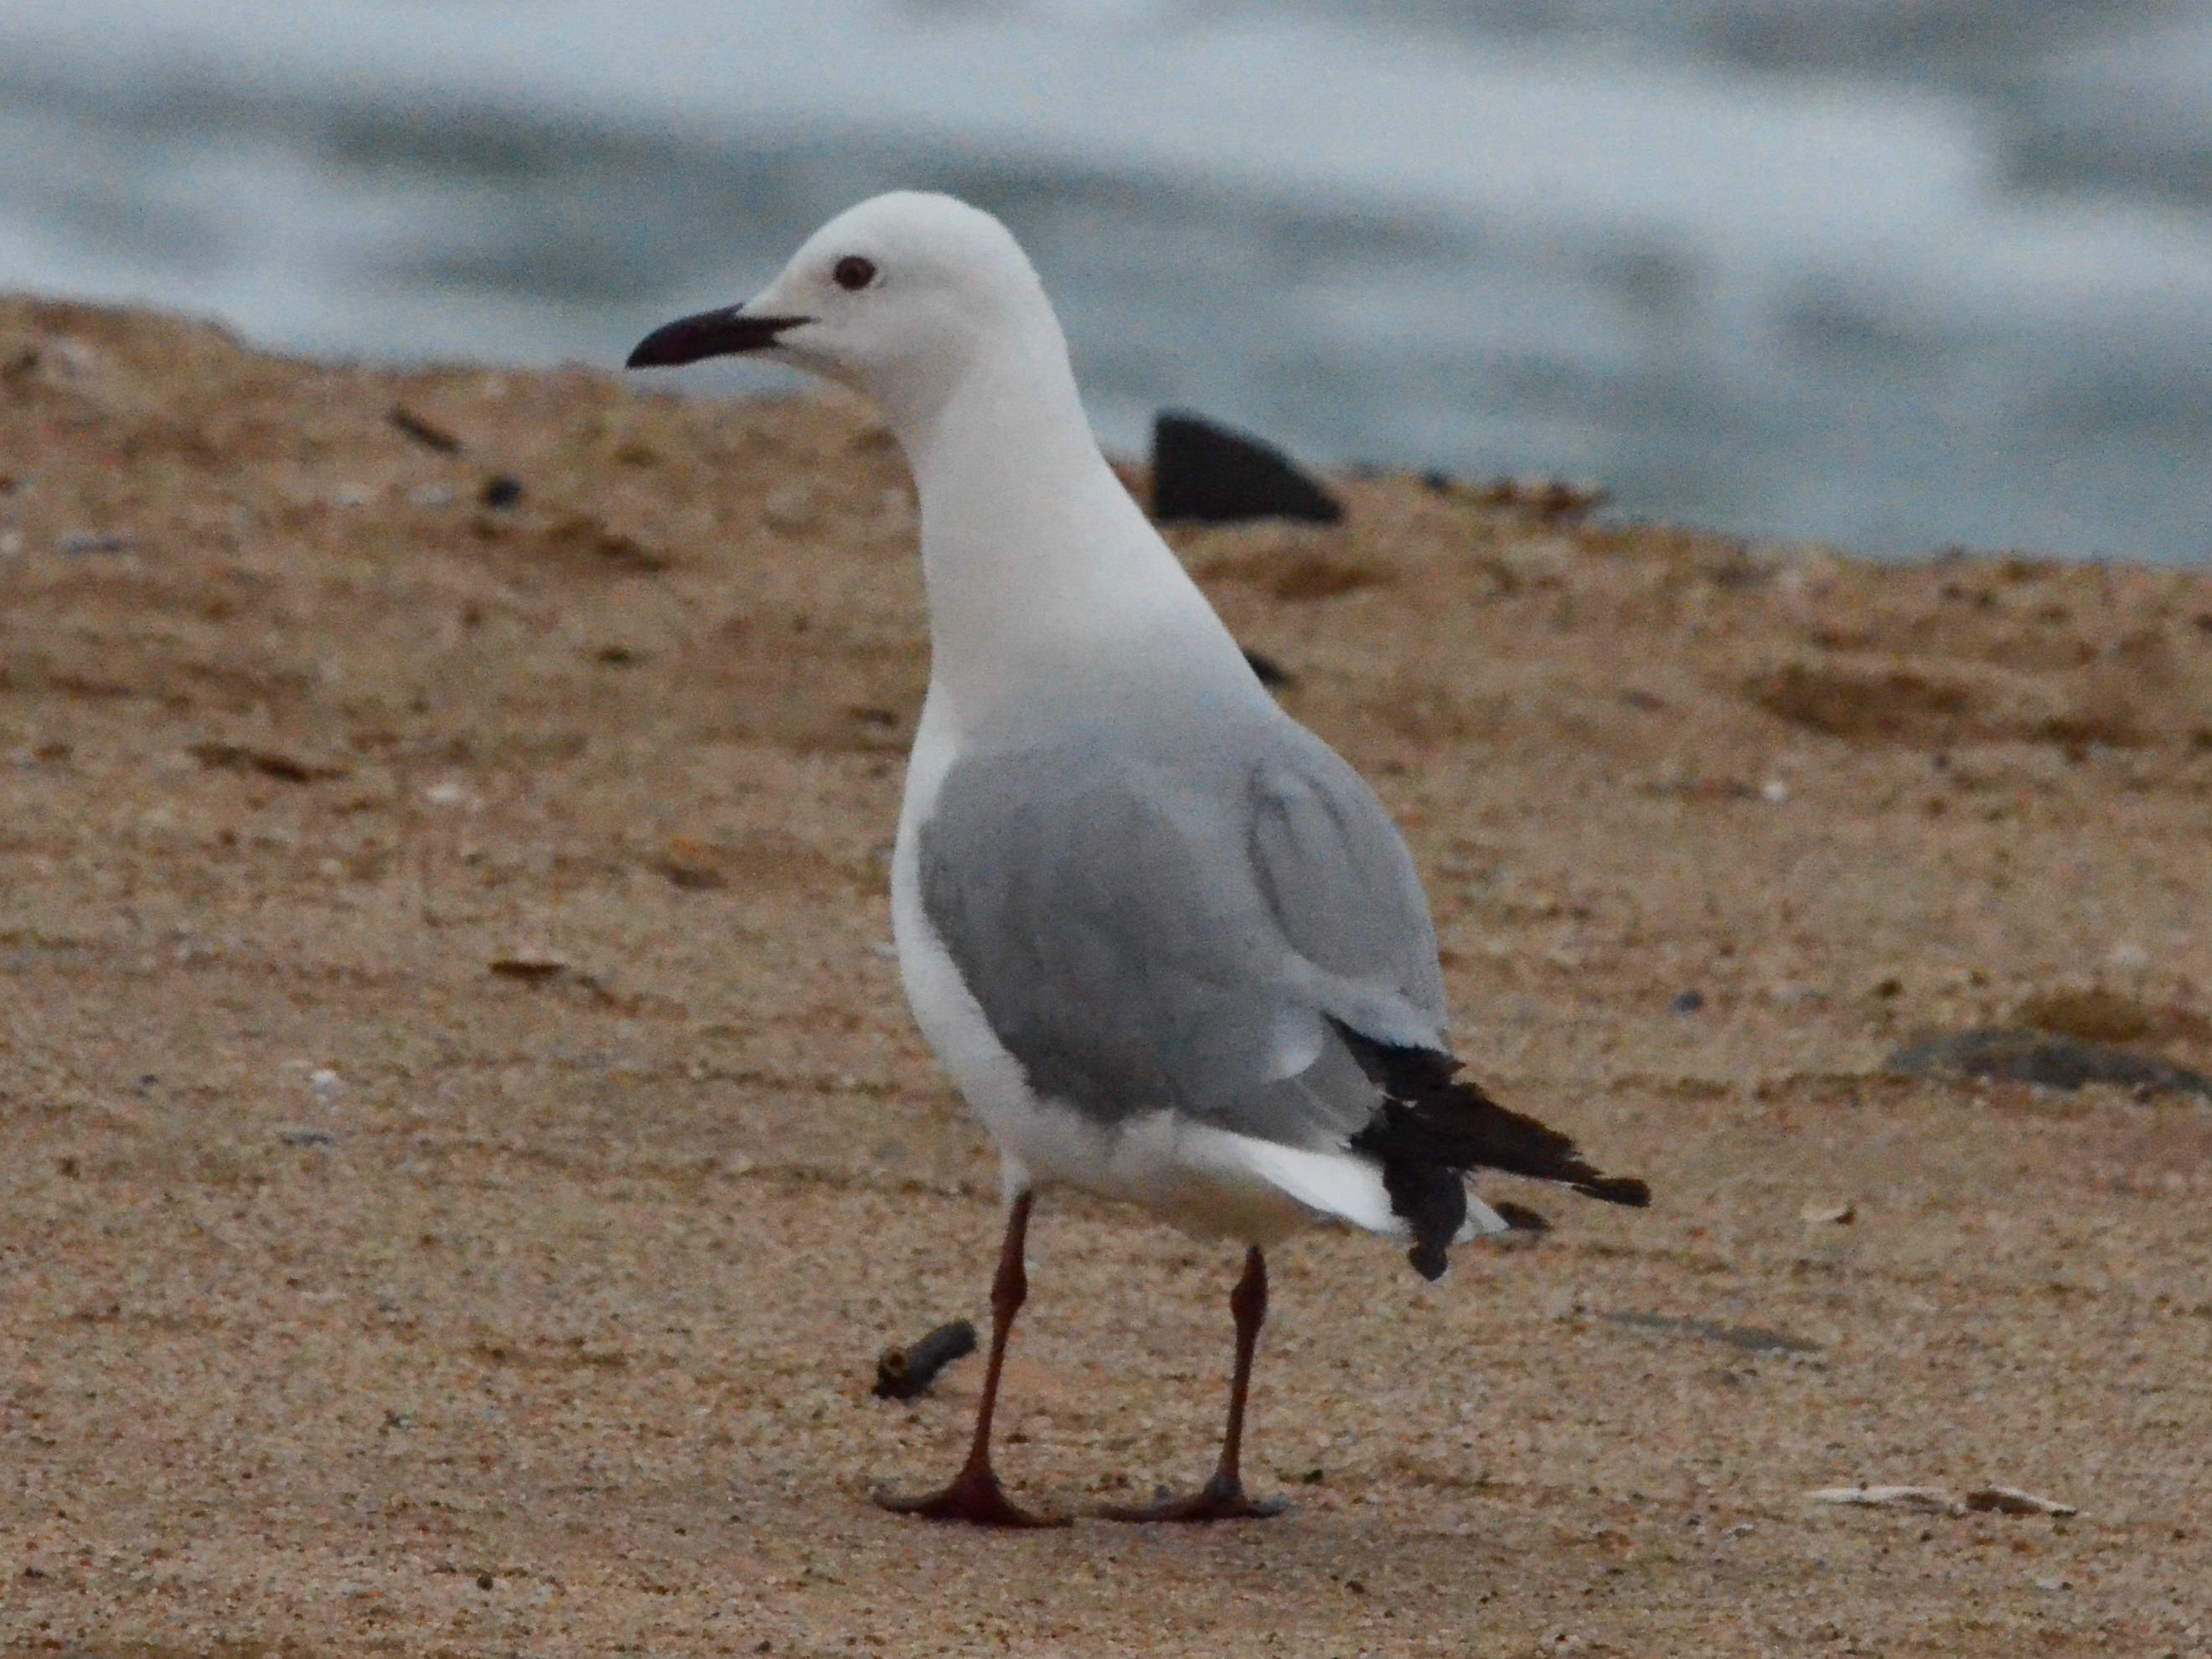 Click picture to see more Hartlaub's Gulls.